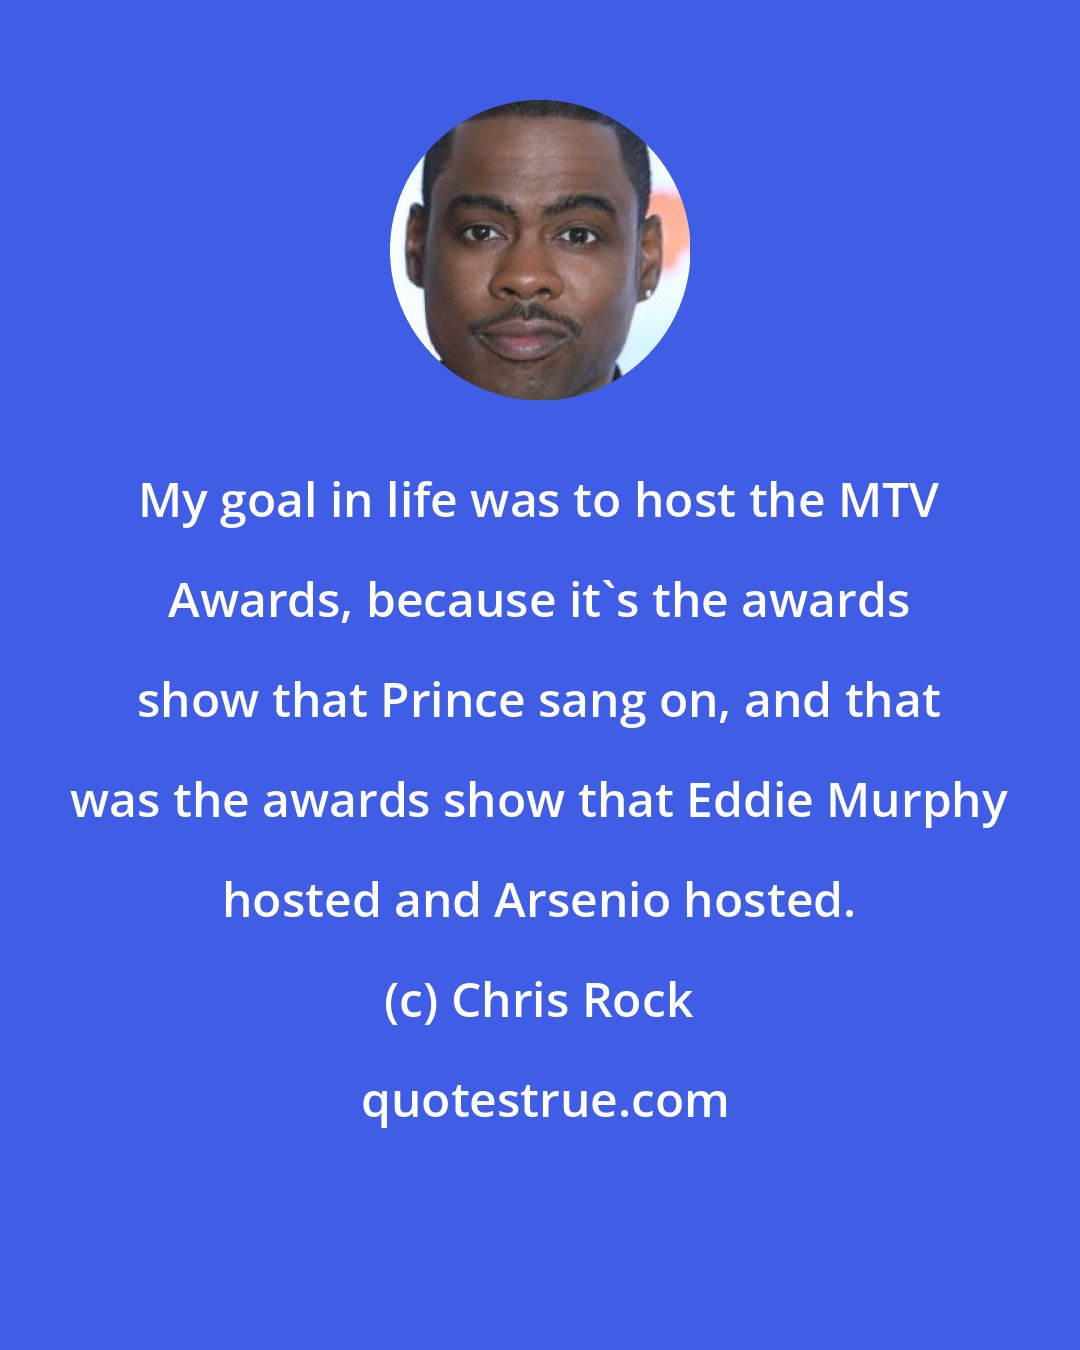 Chris Rock: My goal in life was to host the MTV Awards, because it's the awards show that Prince sang on, and that was the awards show that Eddie Murphy hosted and Arsenio hosted.